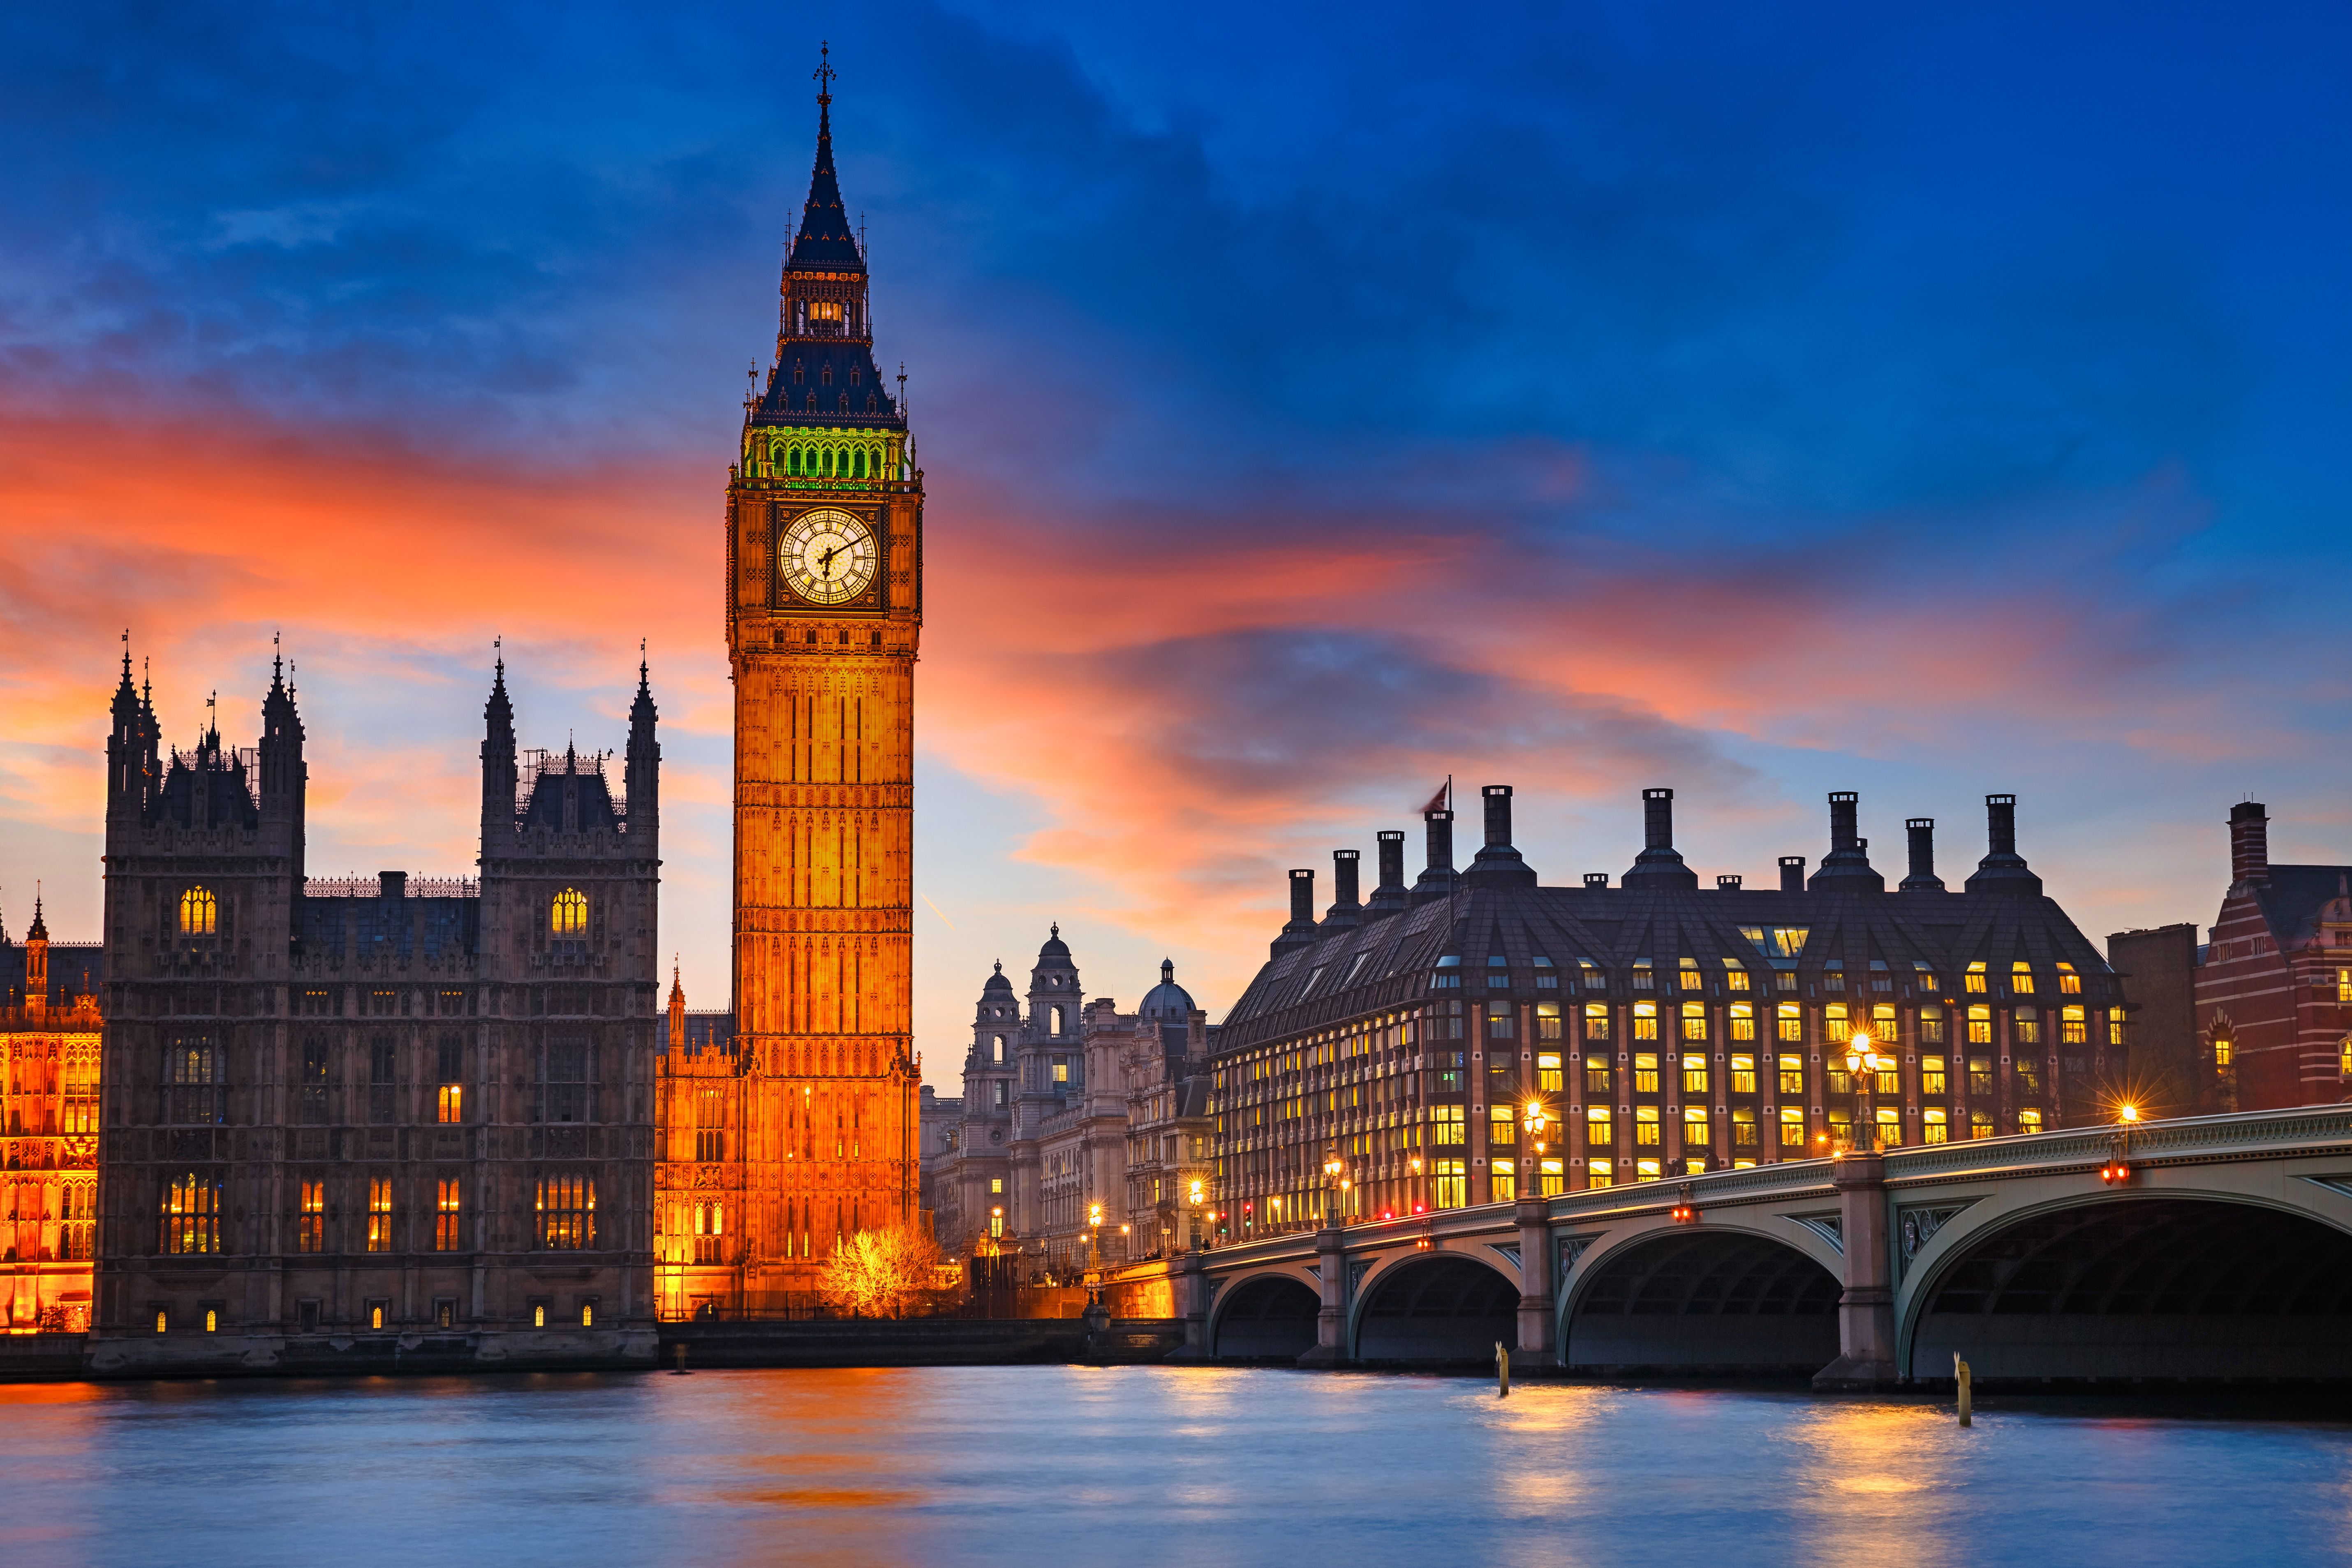 An image of the Big Ben in London, UK